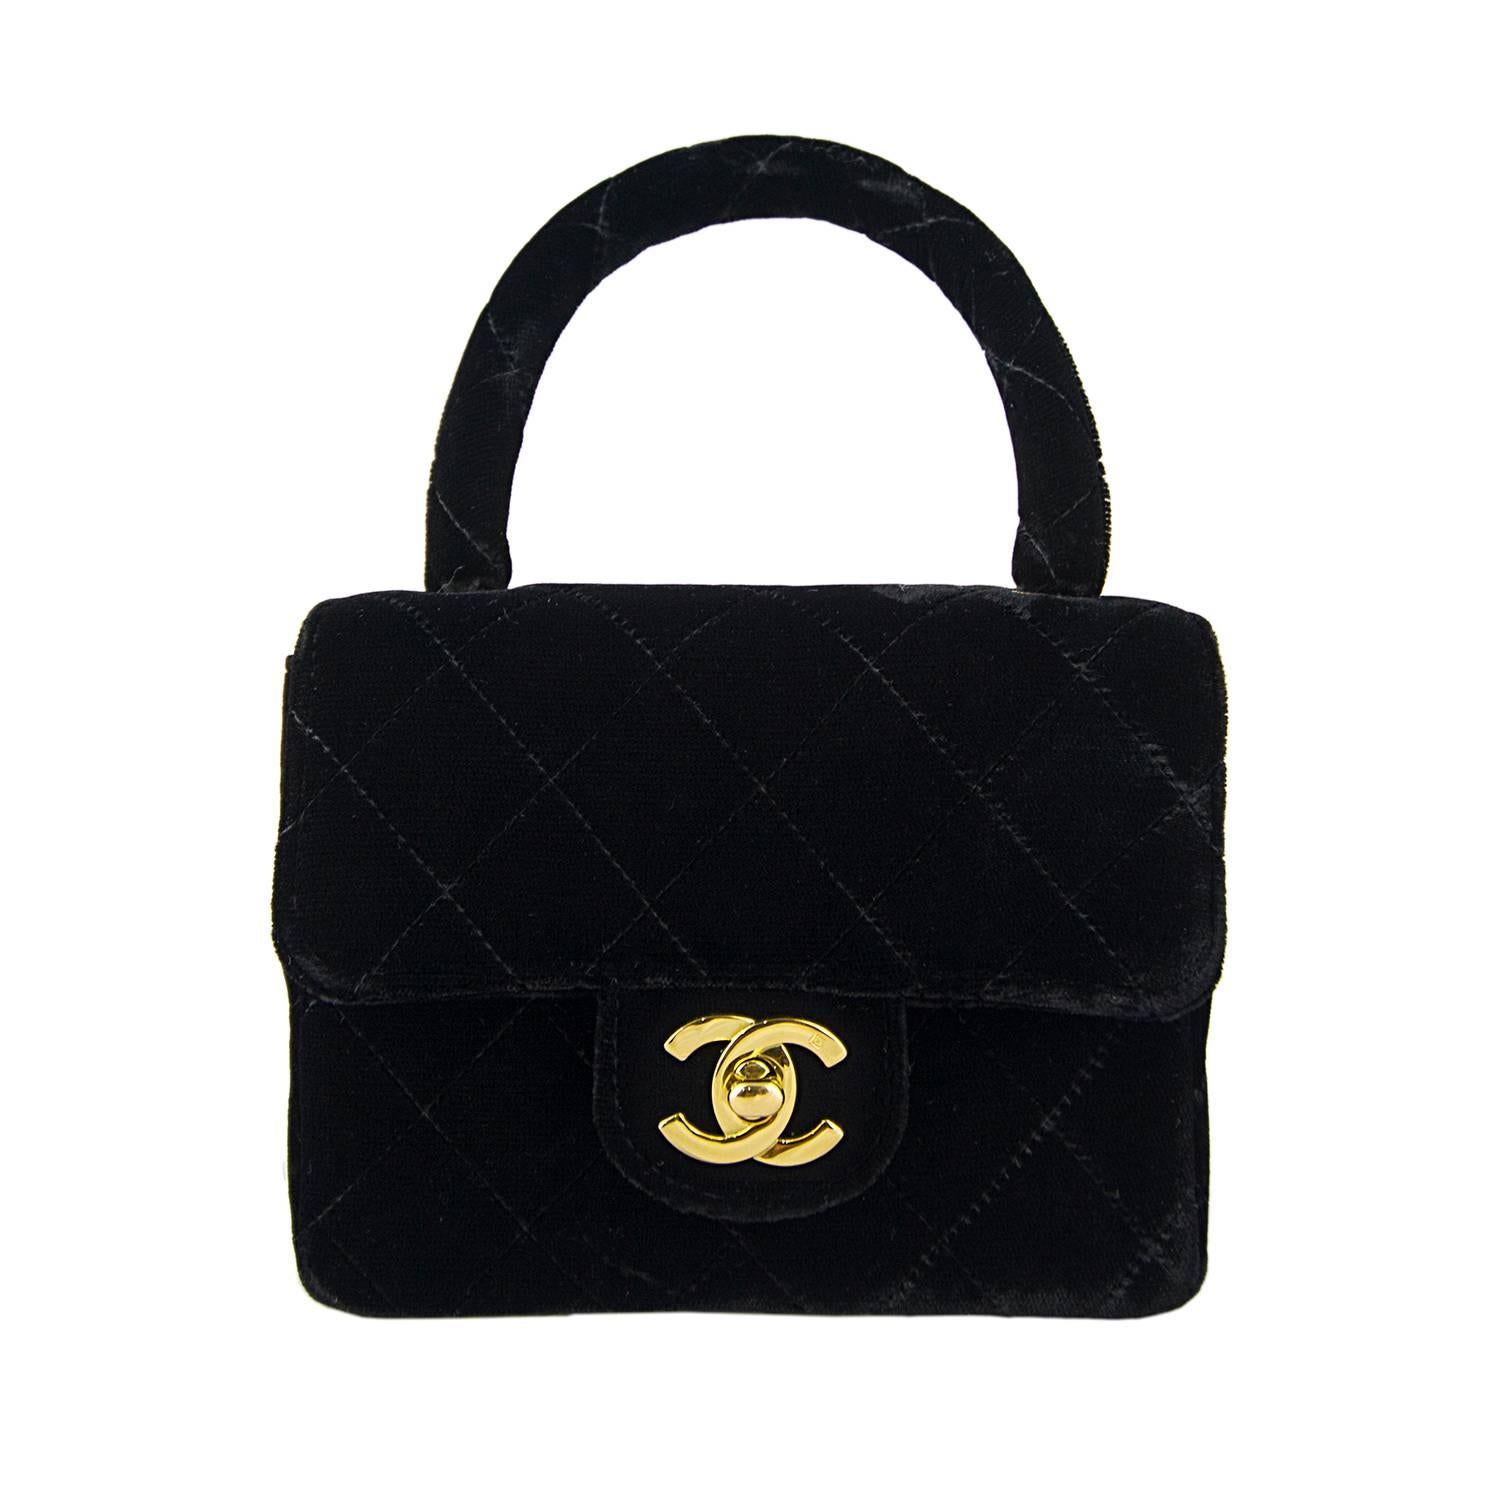 Rare Chanel black velvet double Kelly bag.
With original CC 'bolt'.
Can be detached to give 2 bags.
High carat gold plated hardware.
Made in Italy in 1994 with serial sticker. No card.
Don't hesitate to contact us with queries and image requests.